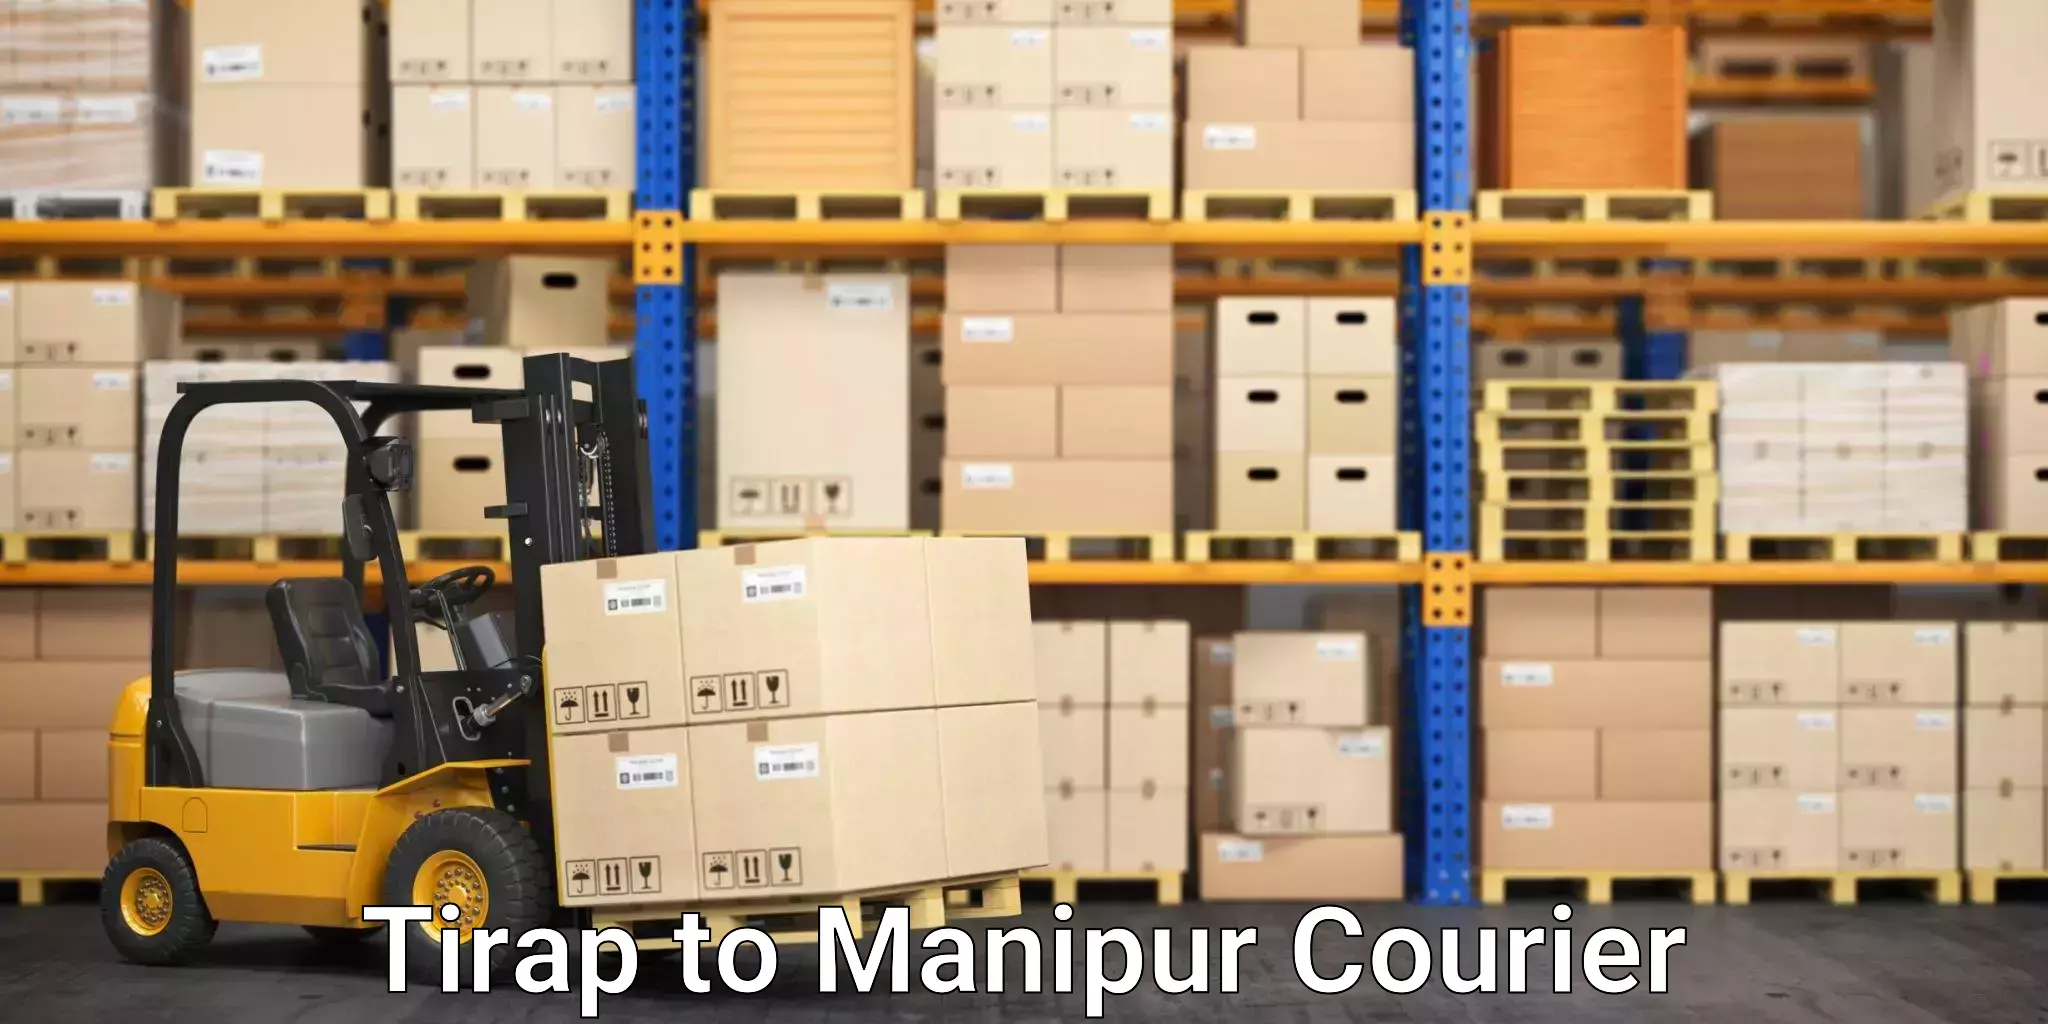 24-hour courier service Tirap to Manipur